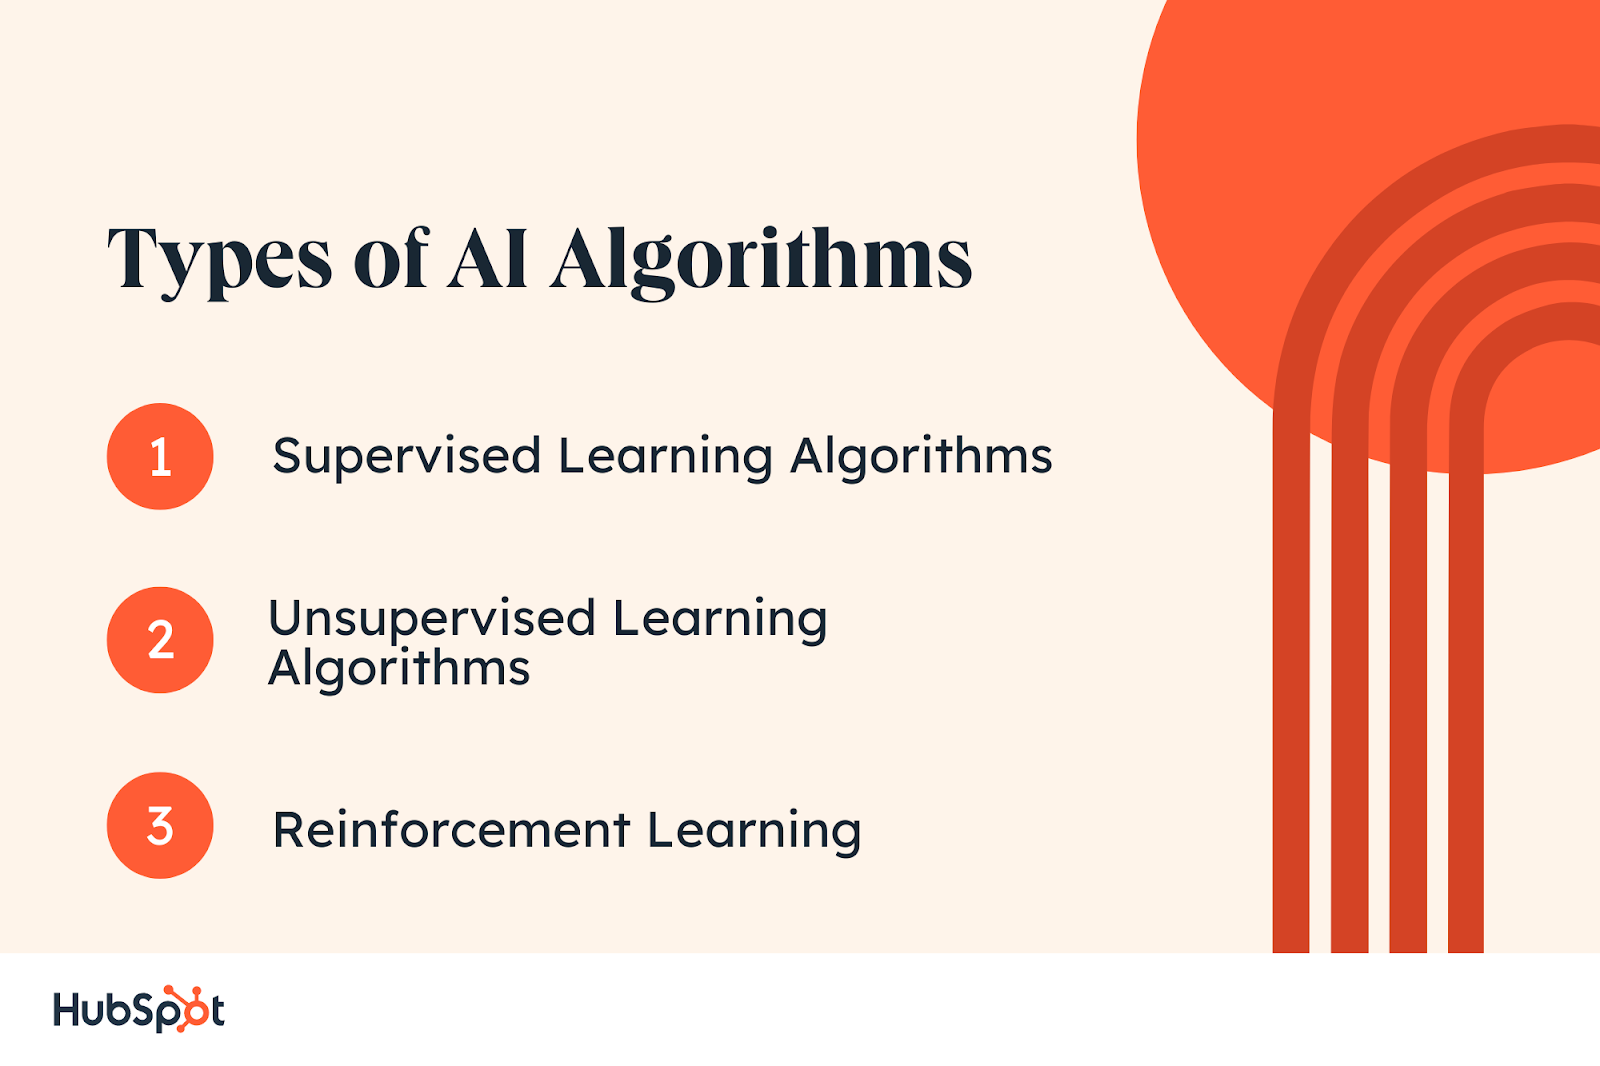 Types of AI Algorithms. Supervised Learning Algorithms. Unsupervised Learning Algorithms. Reinforcement Learning